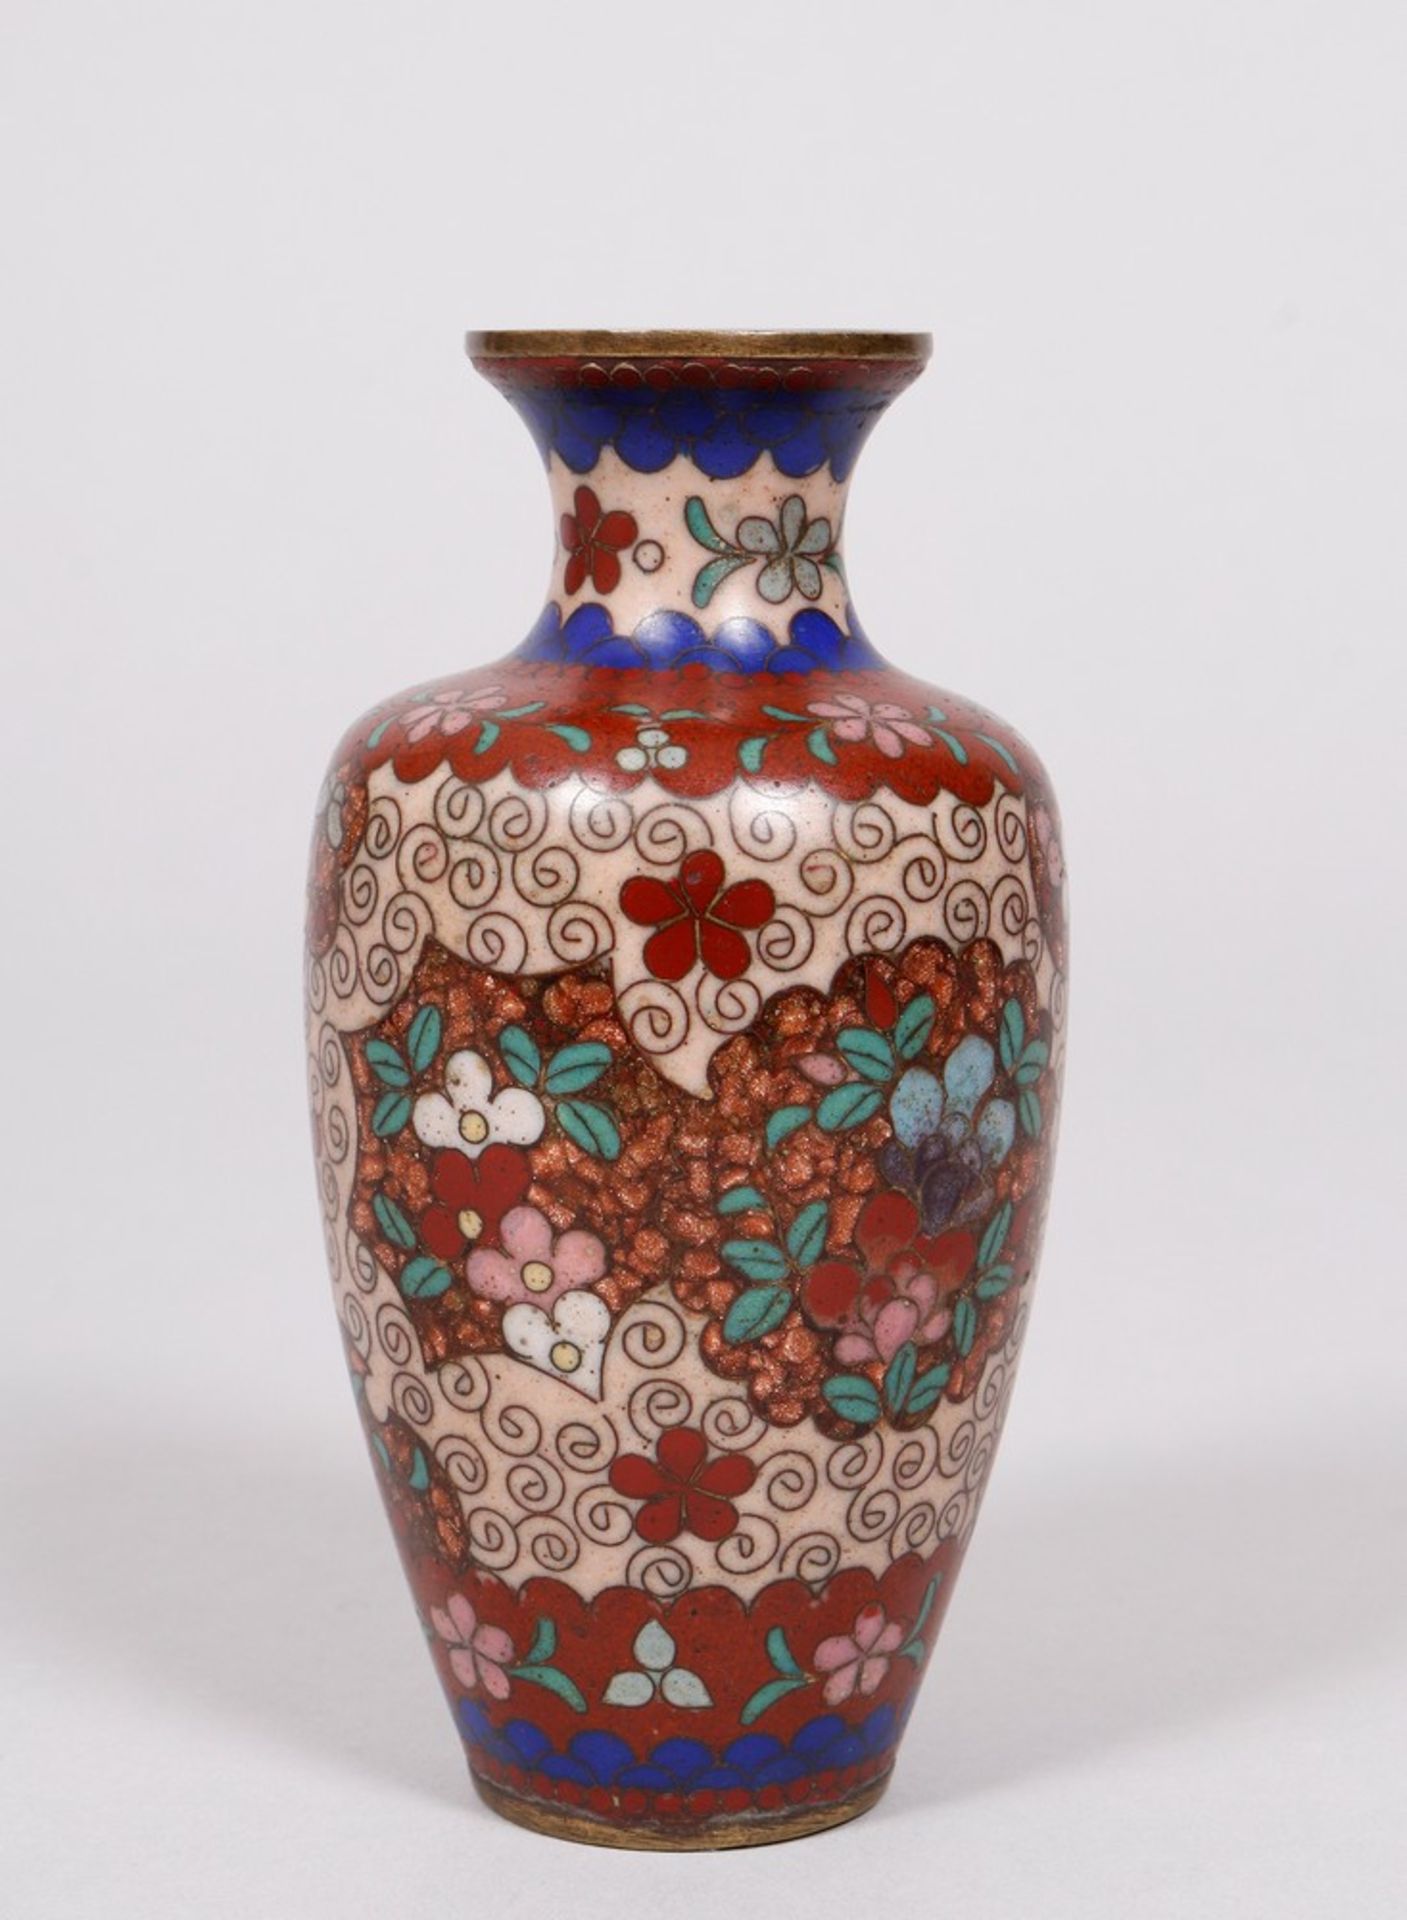 Small cloisonne vase, China, Qing period